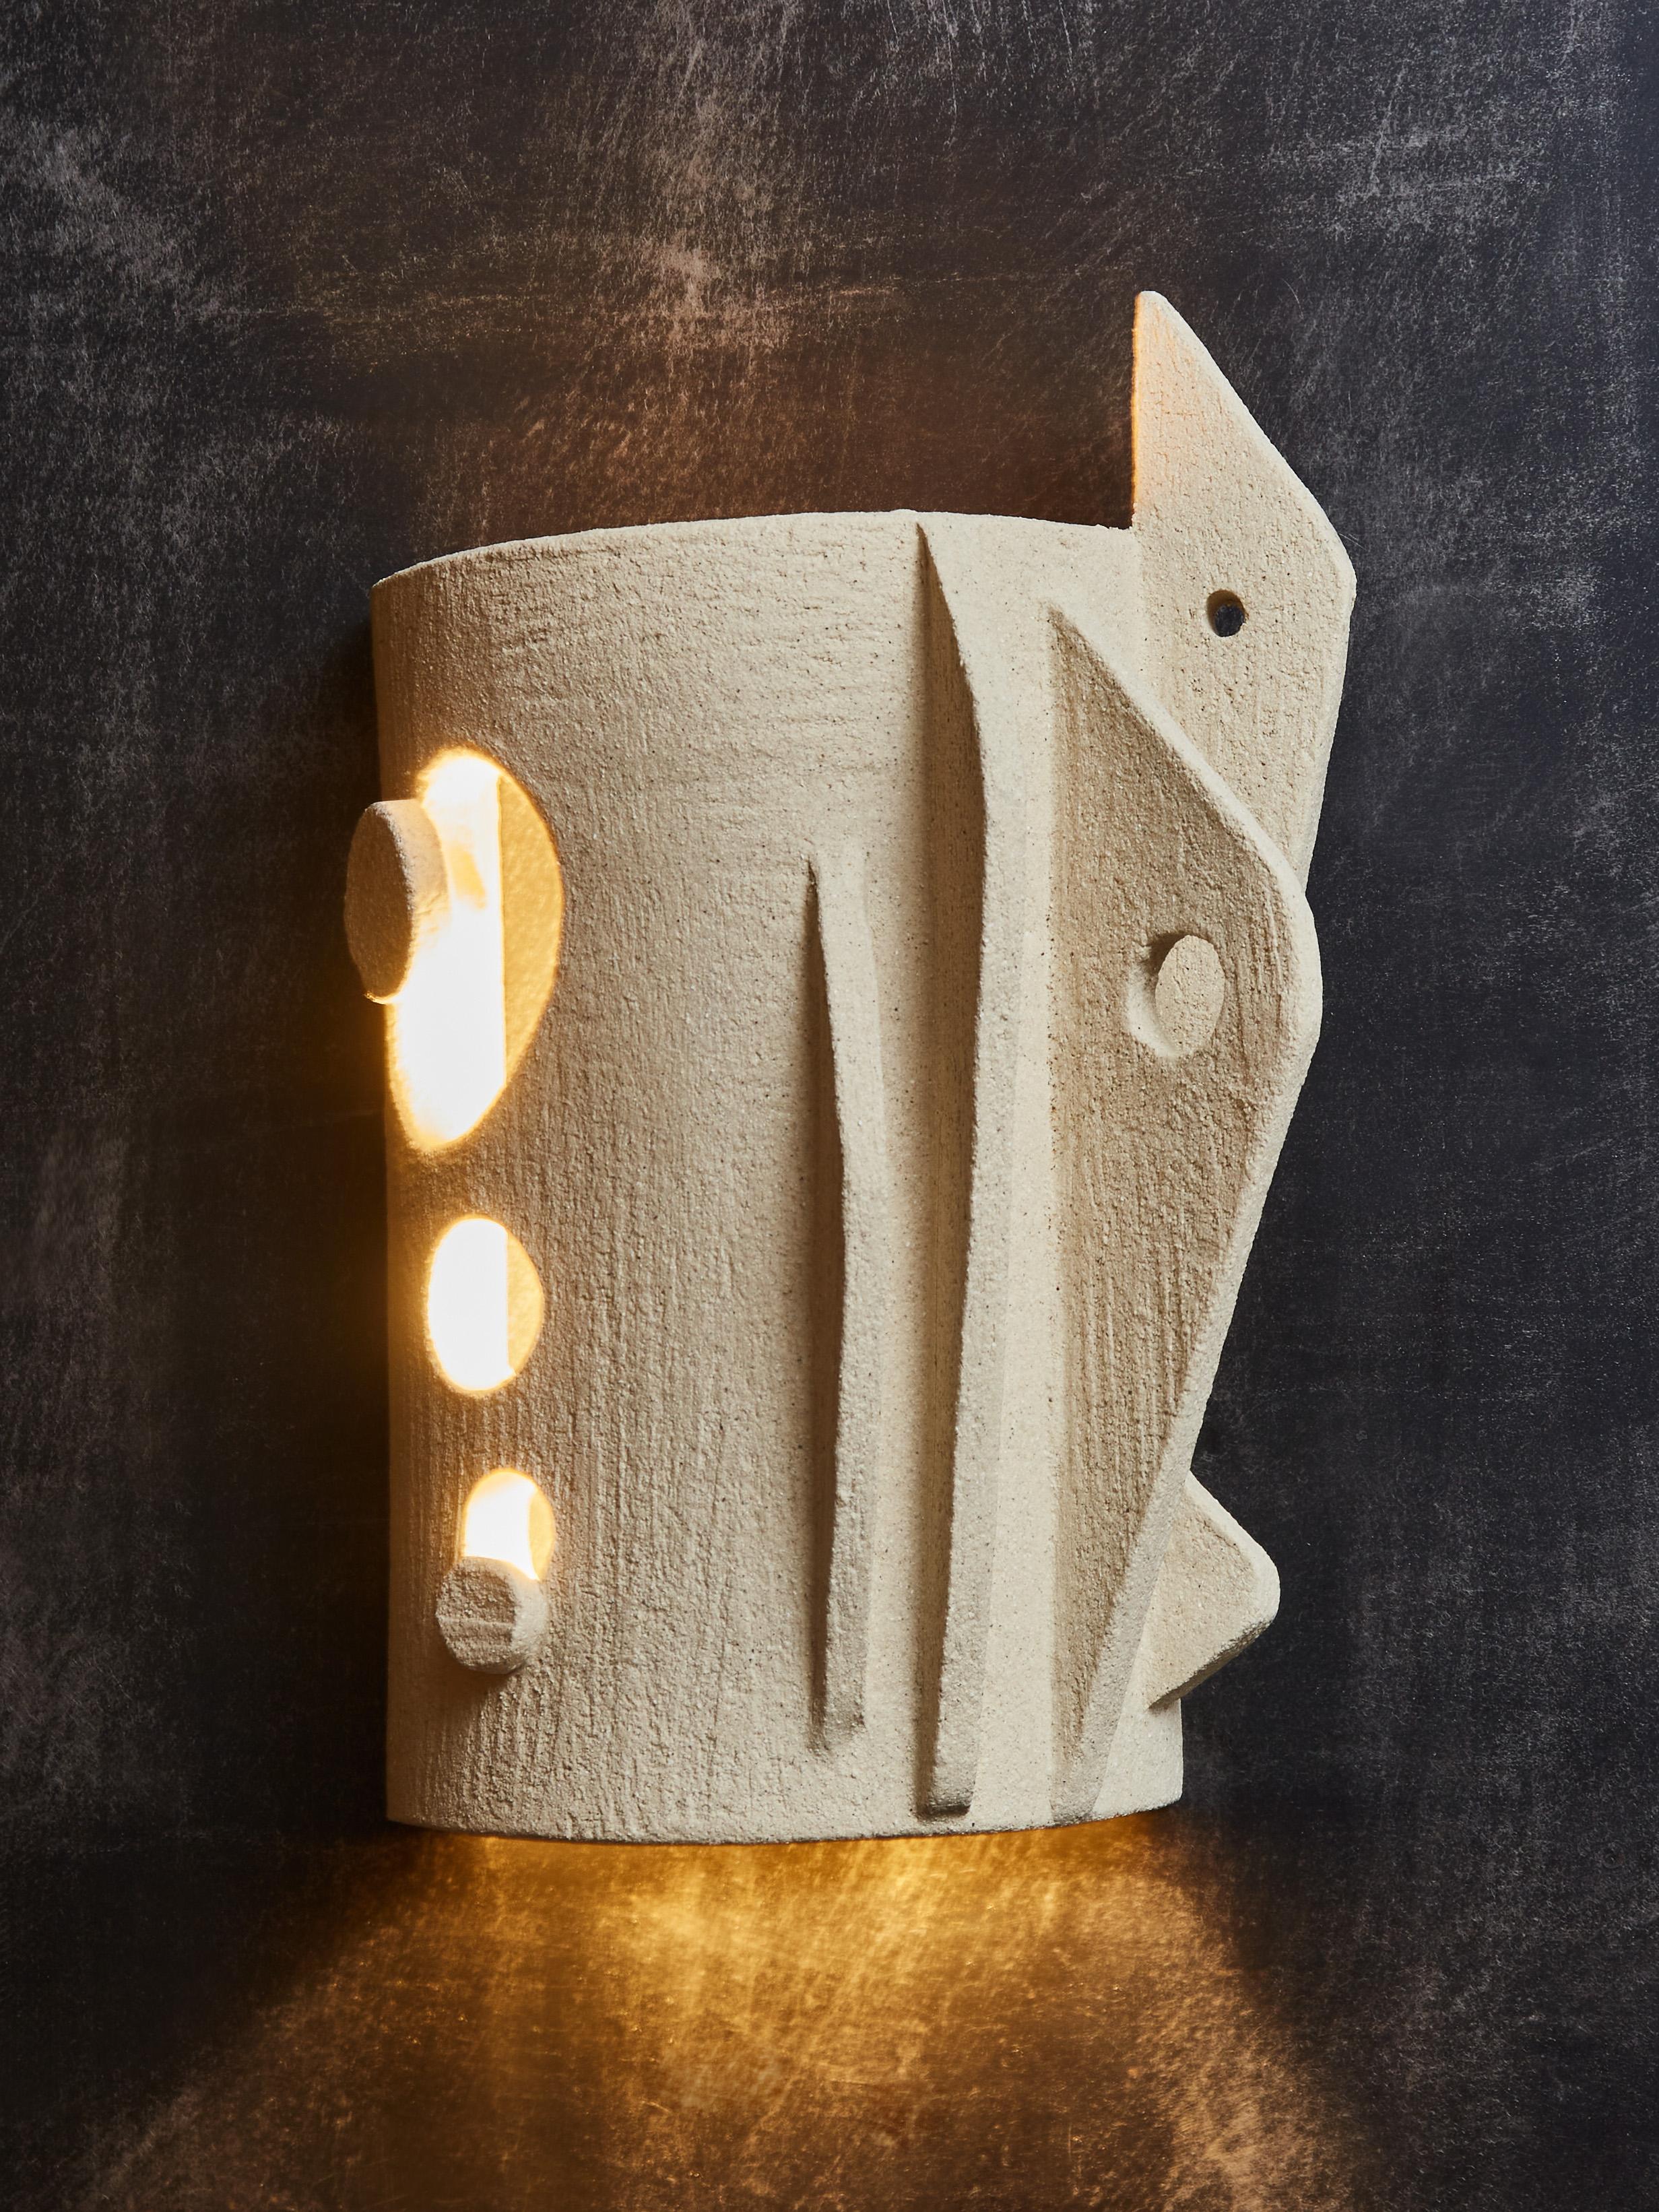 Sculptural pair of wall sconses by Olivia Cognet

Since moving to Los Angeles in 2016, French artist and desi- gner Olivia Cognet has focused on ceramics as the fertile medium through which she expresses her boundless creativity. 
With the